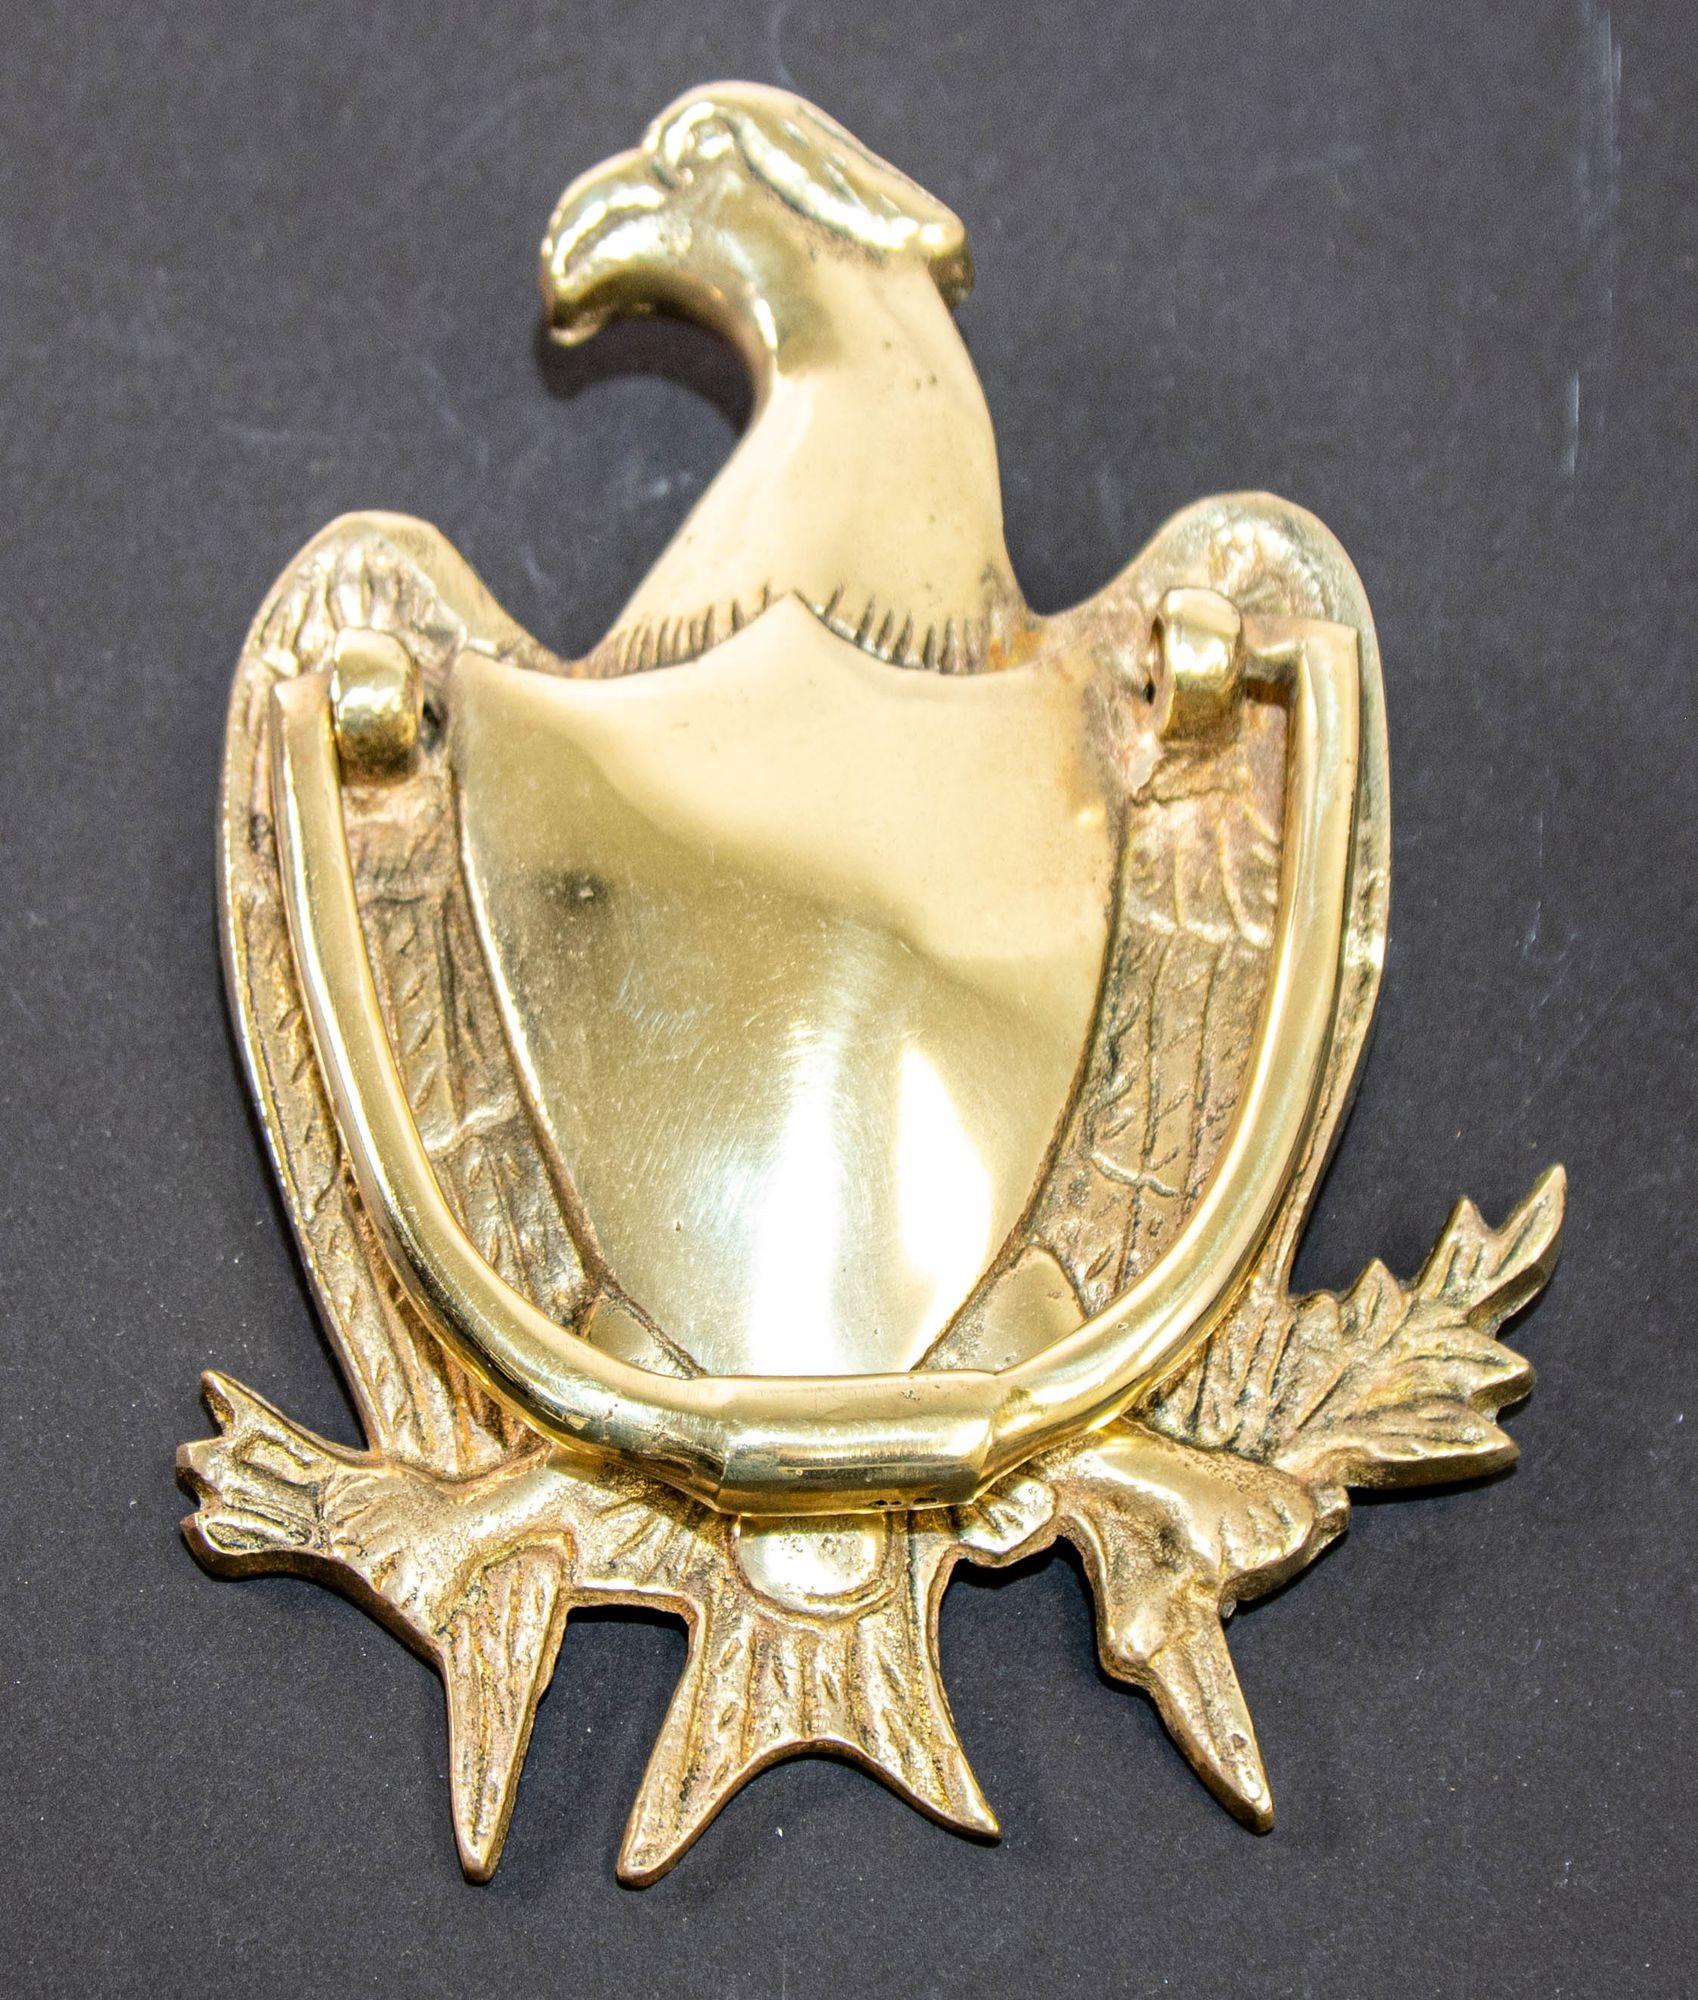 Vintage 1950s solid cast brass American Federal Eagle door knocker.
Large heavy solid cast brass American federal eagle with shield design door knocker.
Polished gold brass door knocker shaped as an American eagle with swinging handle